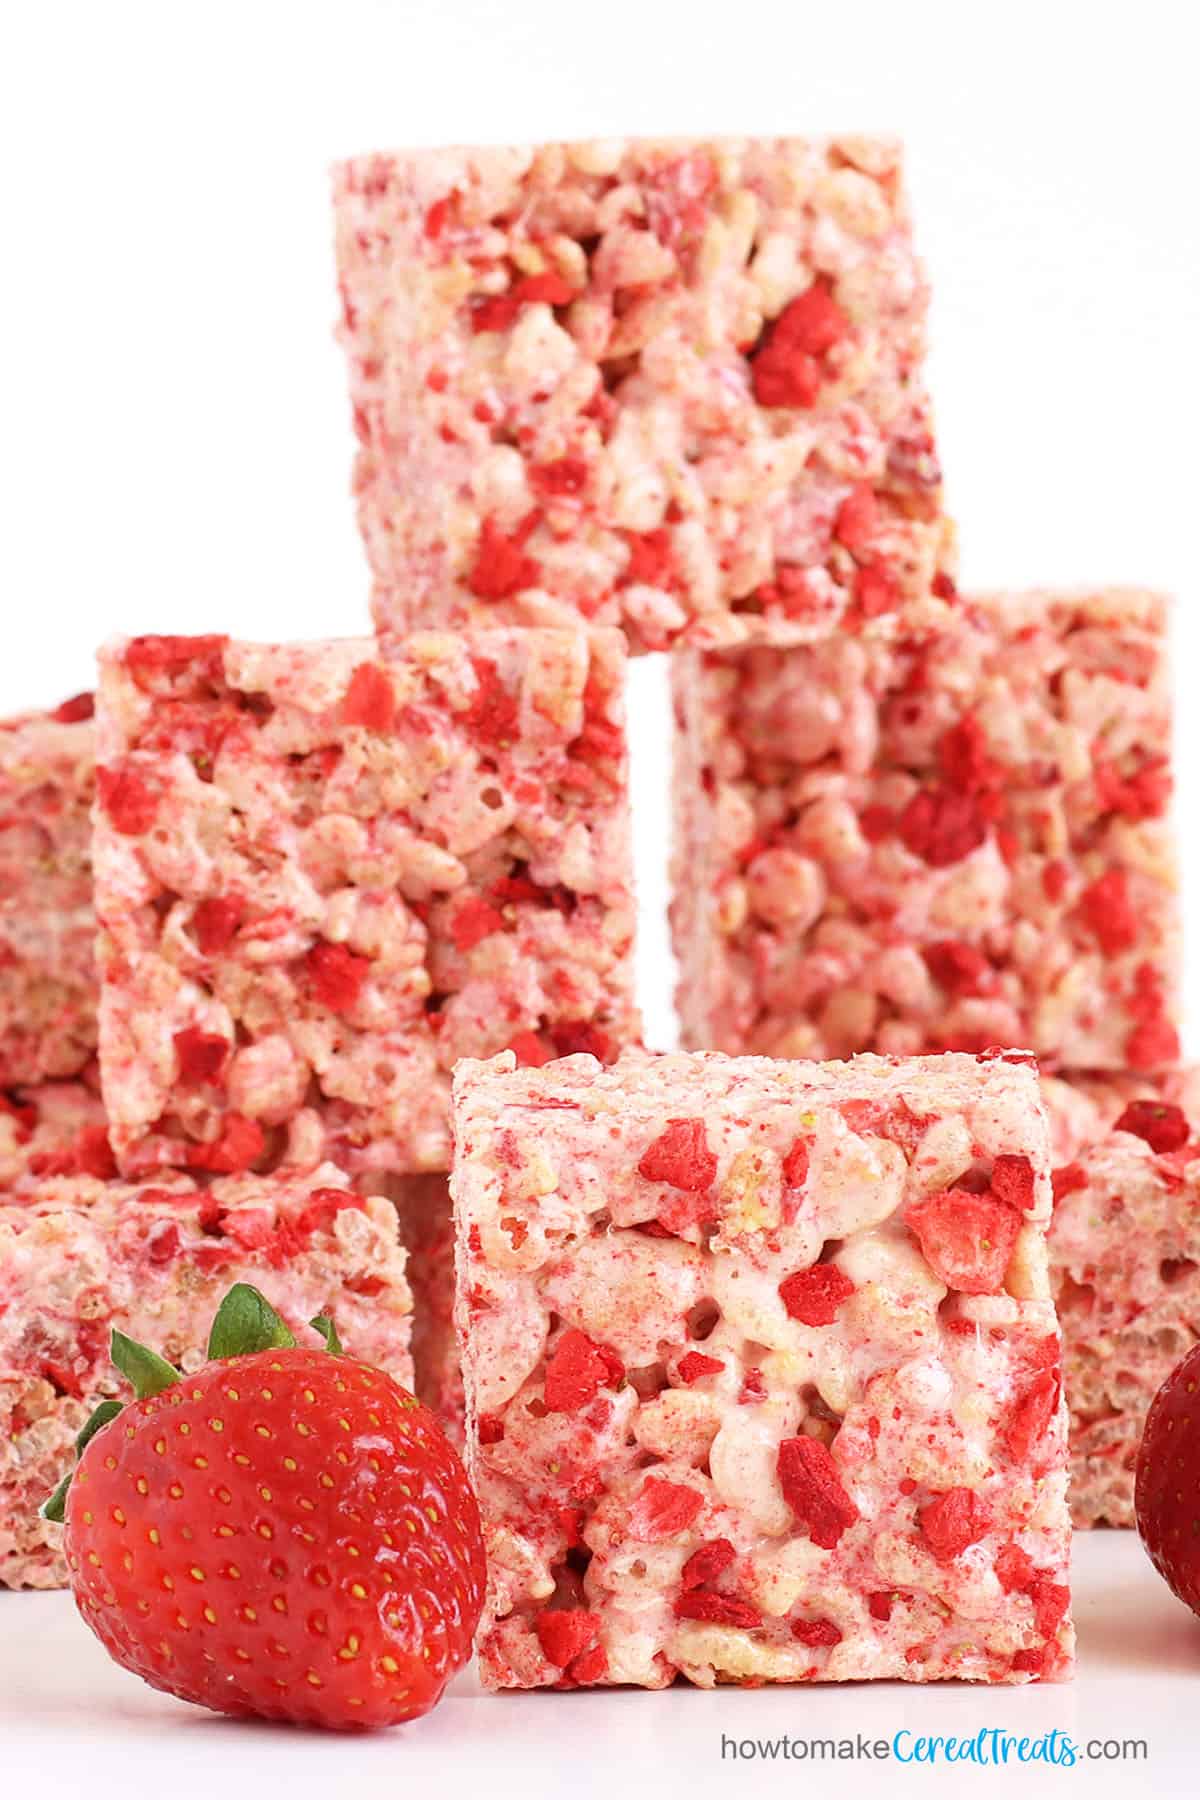 Square rice krispie treats packed with freeze-dried strawberries are stacked up next to fresh strawberries.